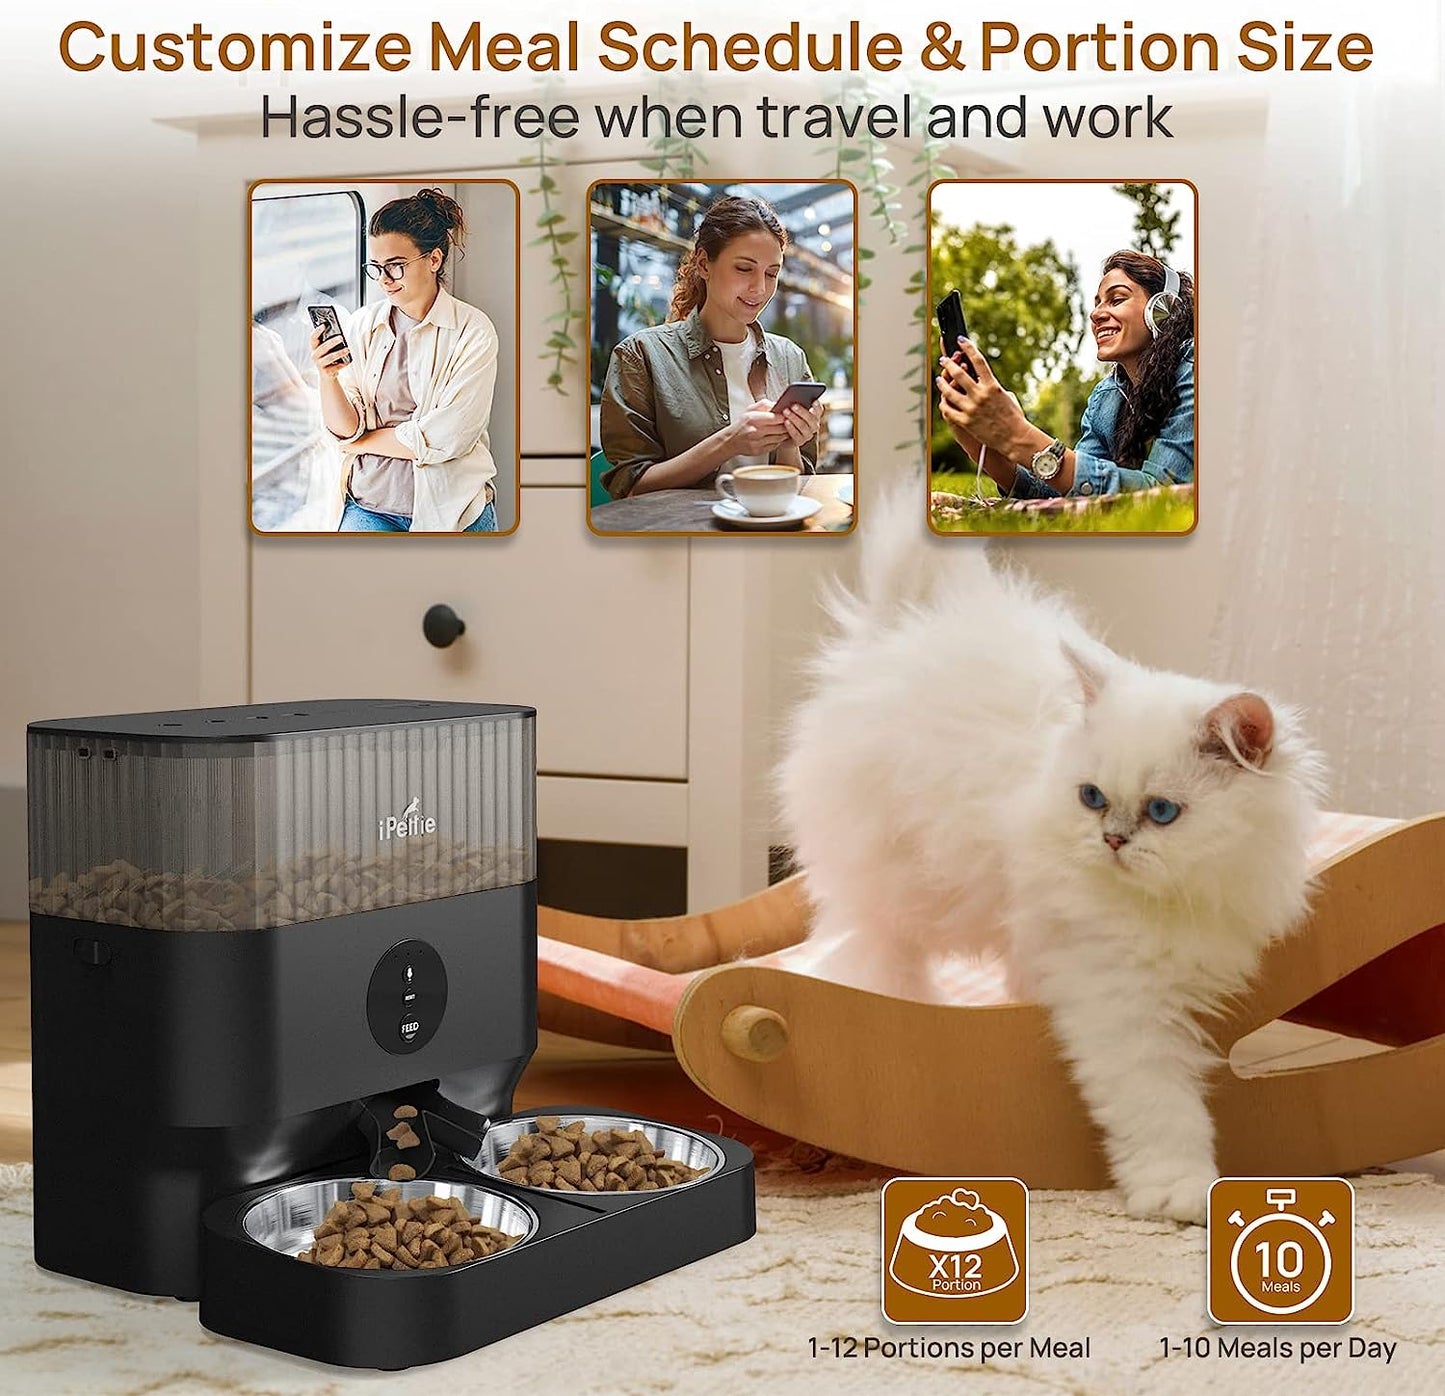 iPettie Automatic Cat Feeder for Two Cats, 2.4G WiFi App Control, 5L/21 Cup Capacity, 1-10 Meals Per Day, Adjustable Bowl Height